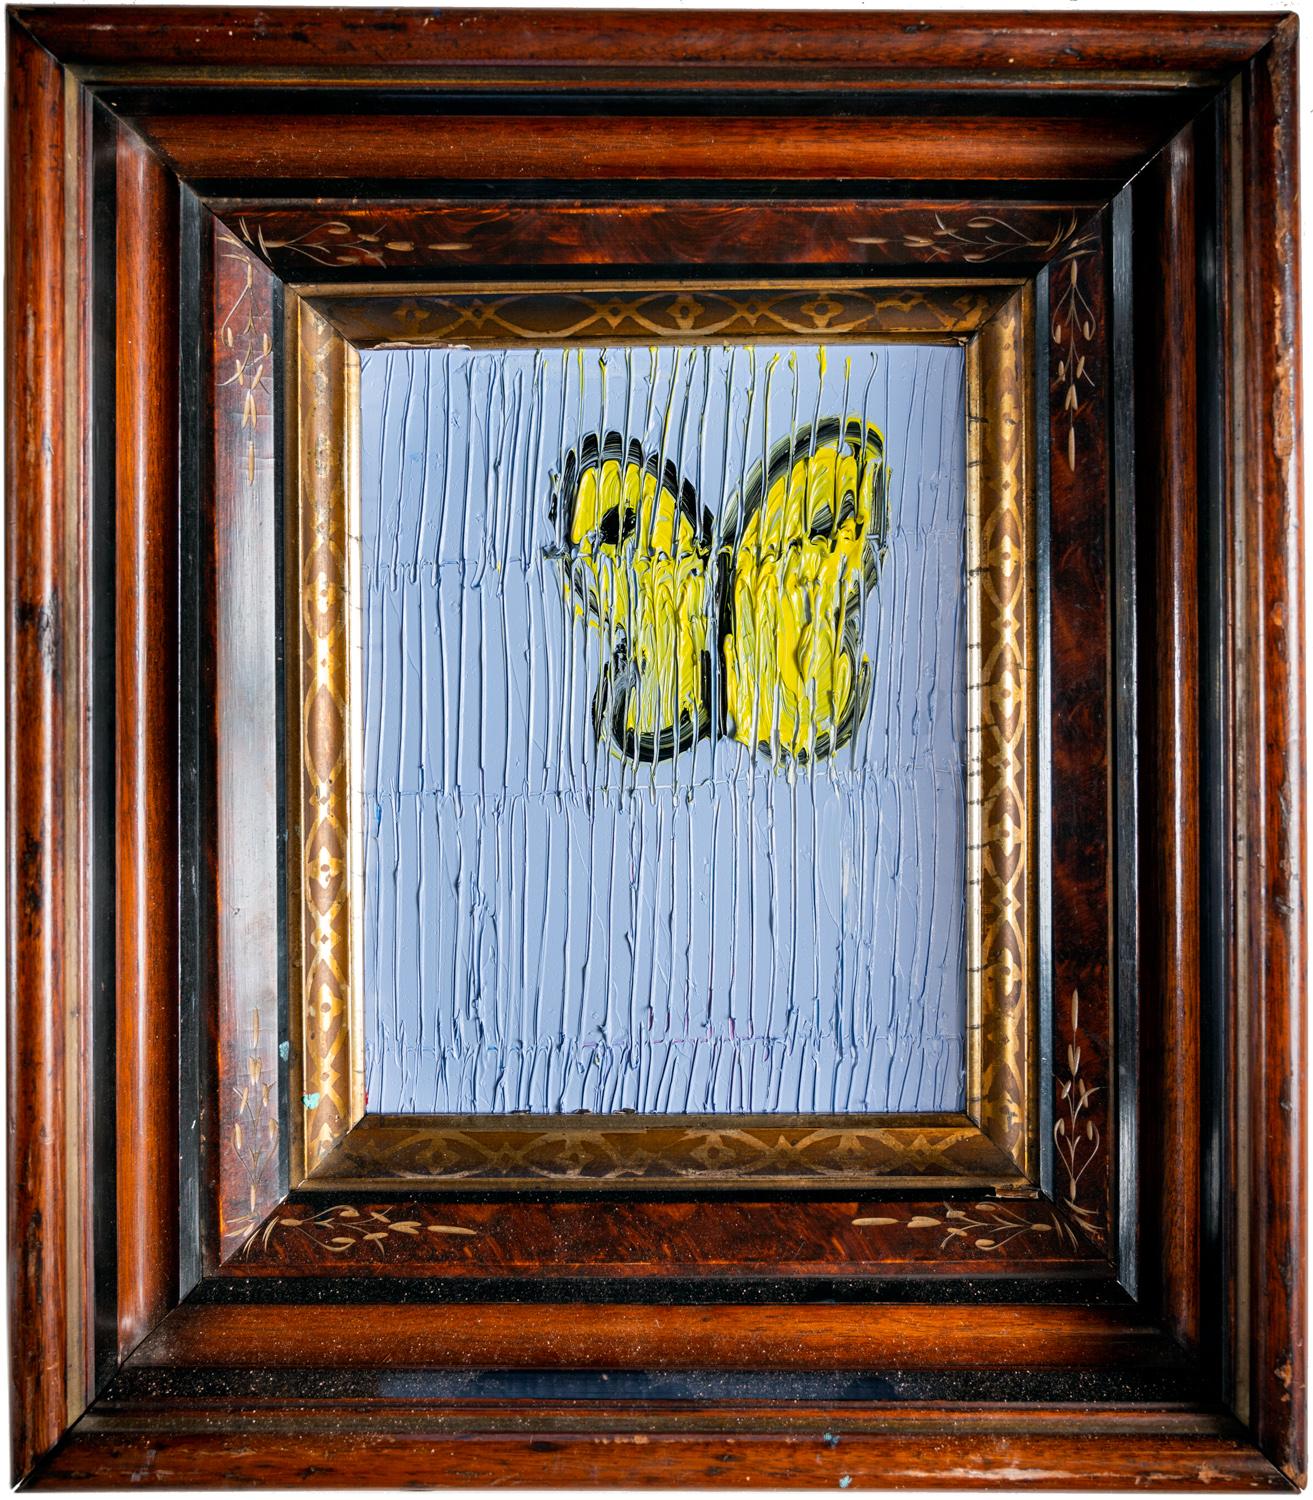 Single "Butterfly Painting" Original Oil Painting in Ornate Vintage Frame